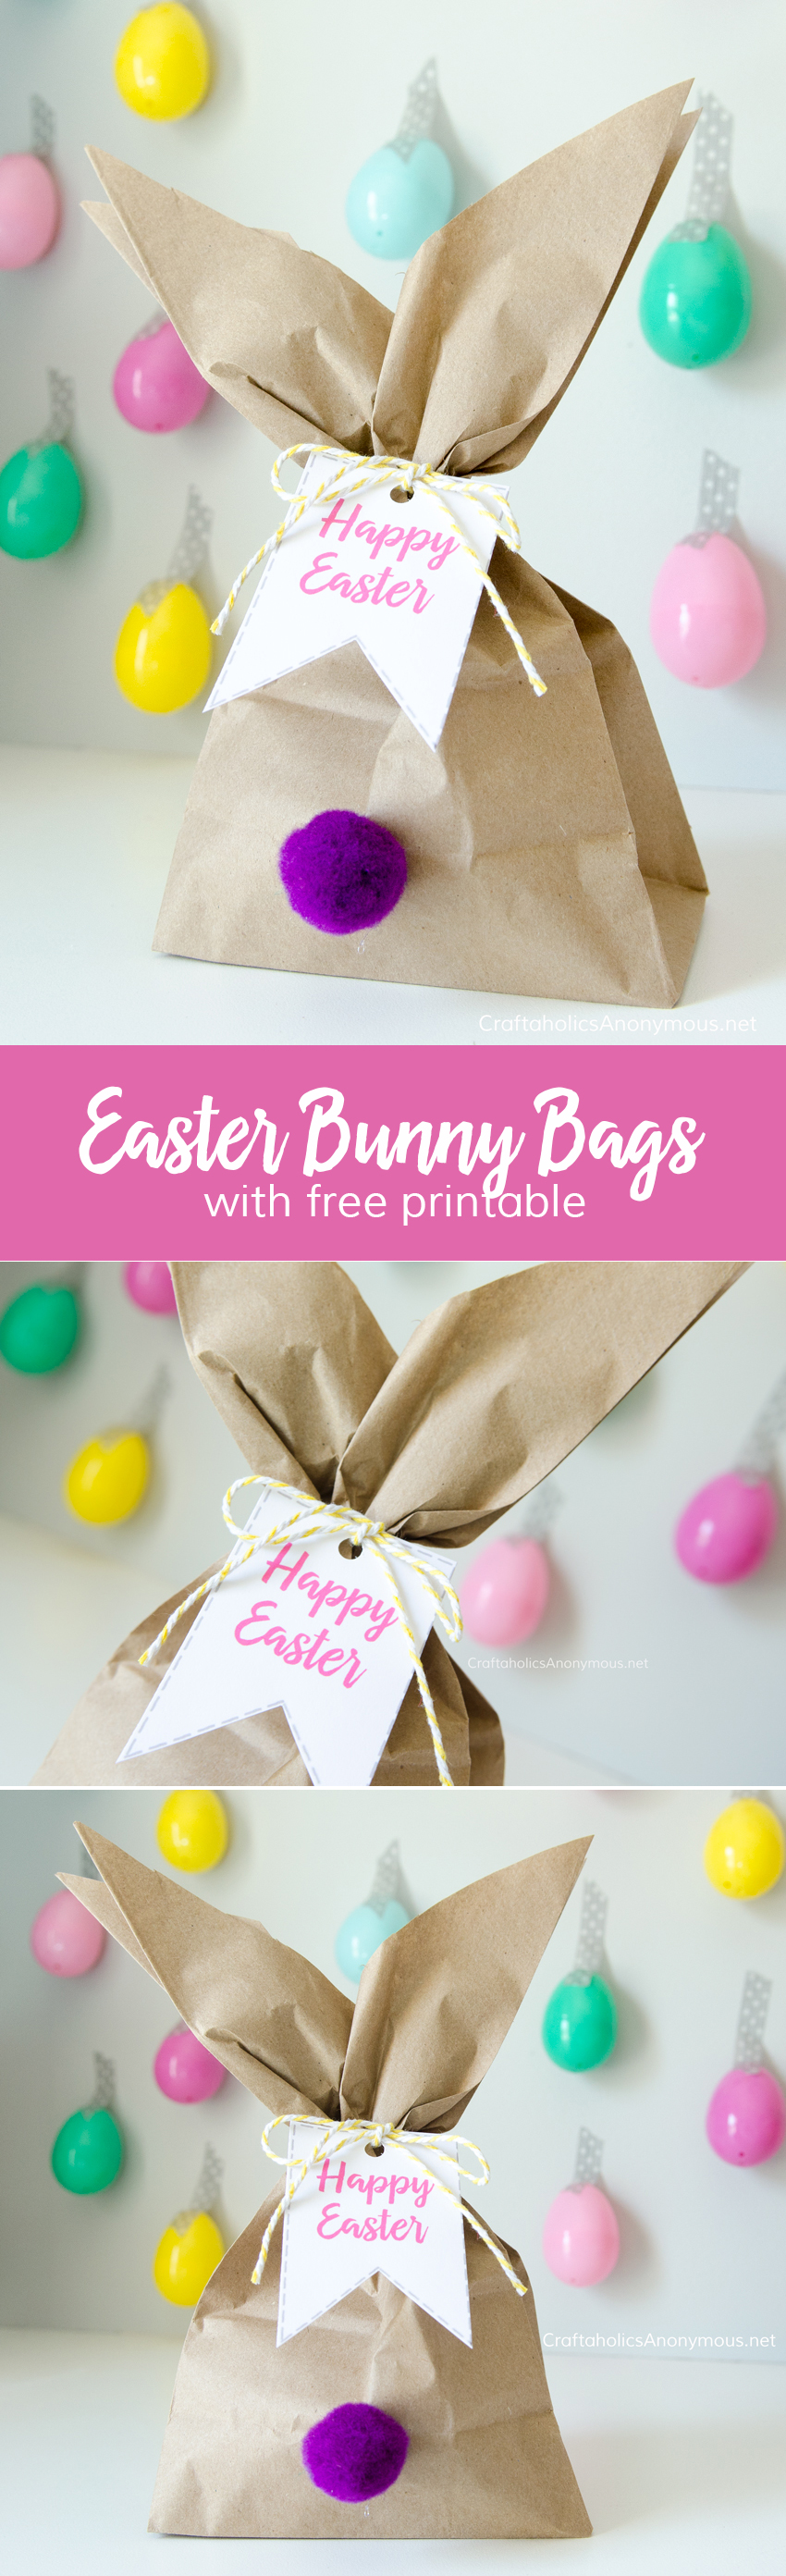 Details about   *2 PACKAGES* TREAT BAGS 4”x9” RABBIT EASTER TREAT BAGS BUNNY TREAT BAGS 40 COUNT 